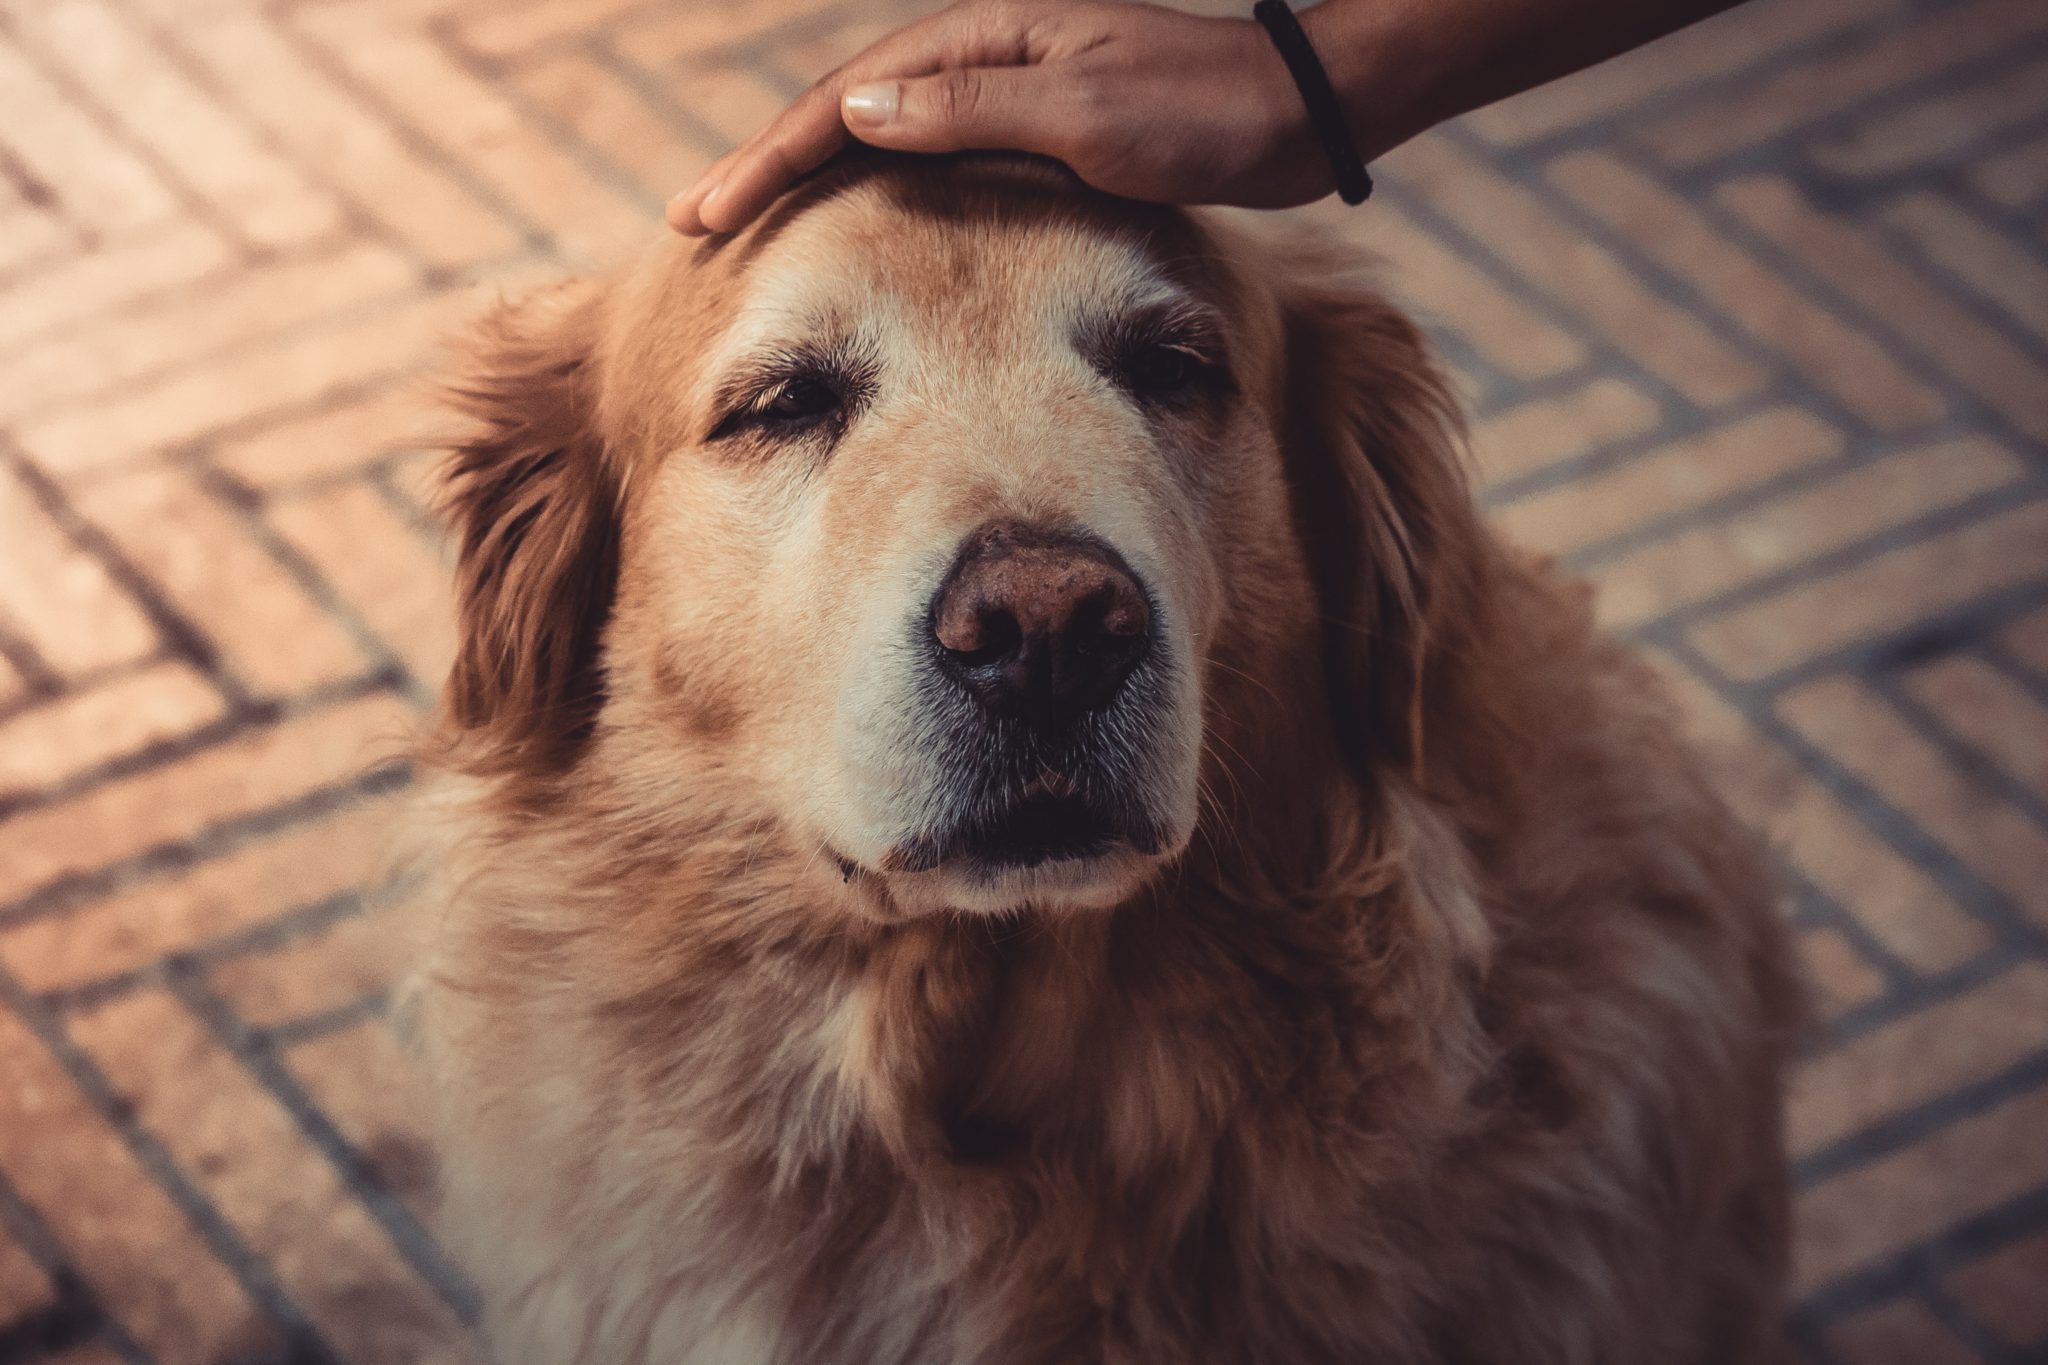 An old golden retriever with owner's loving hand on his head